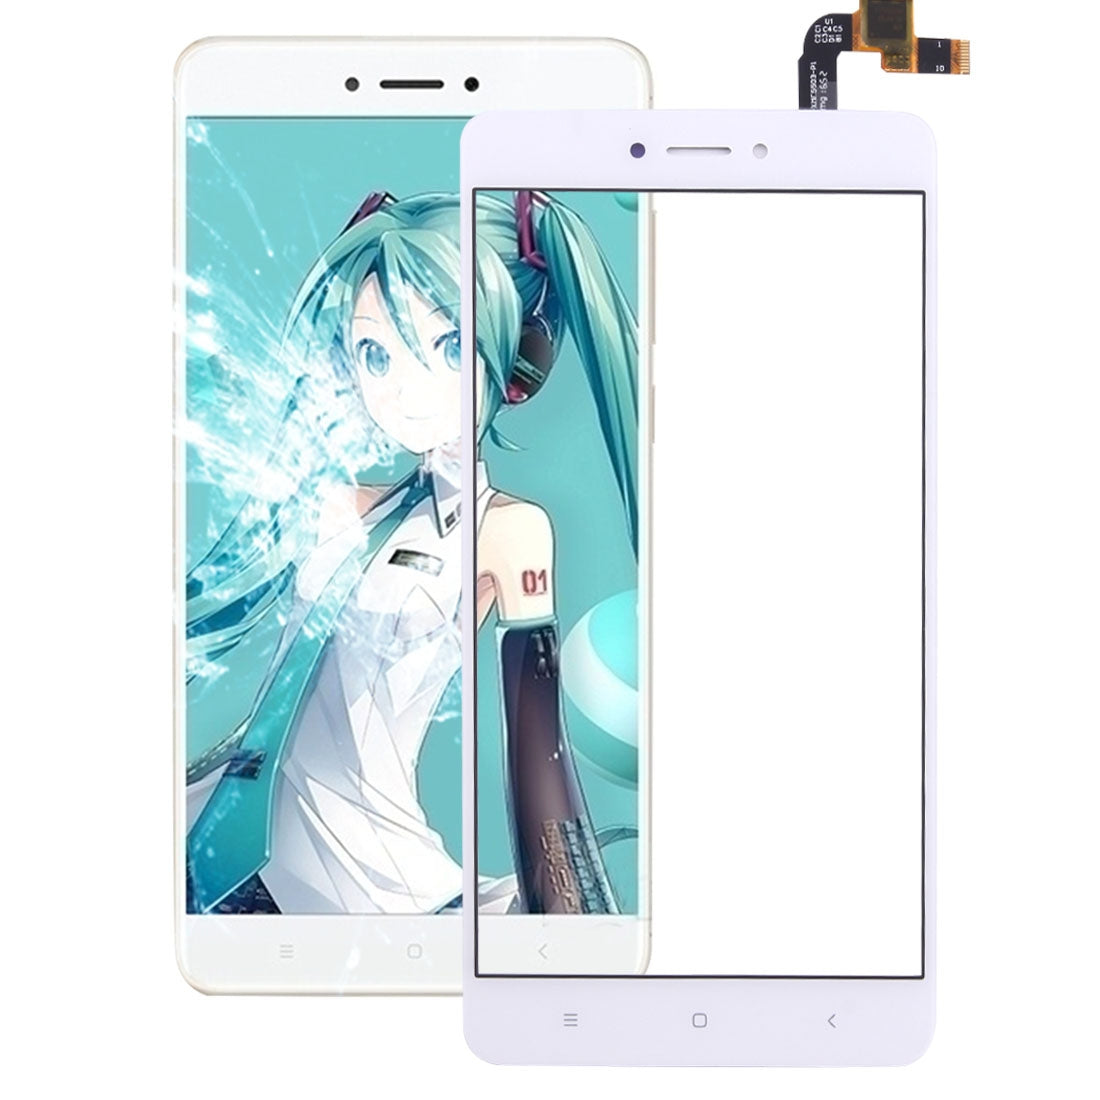 Touch Screen Xiaomi Redmi Note 4X Note 4 Global Version Snapdragon 625 White